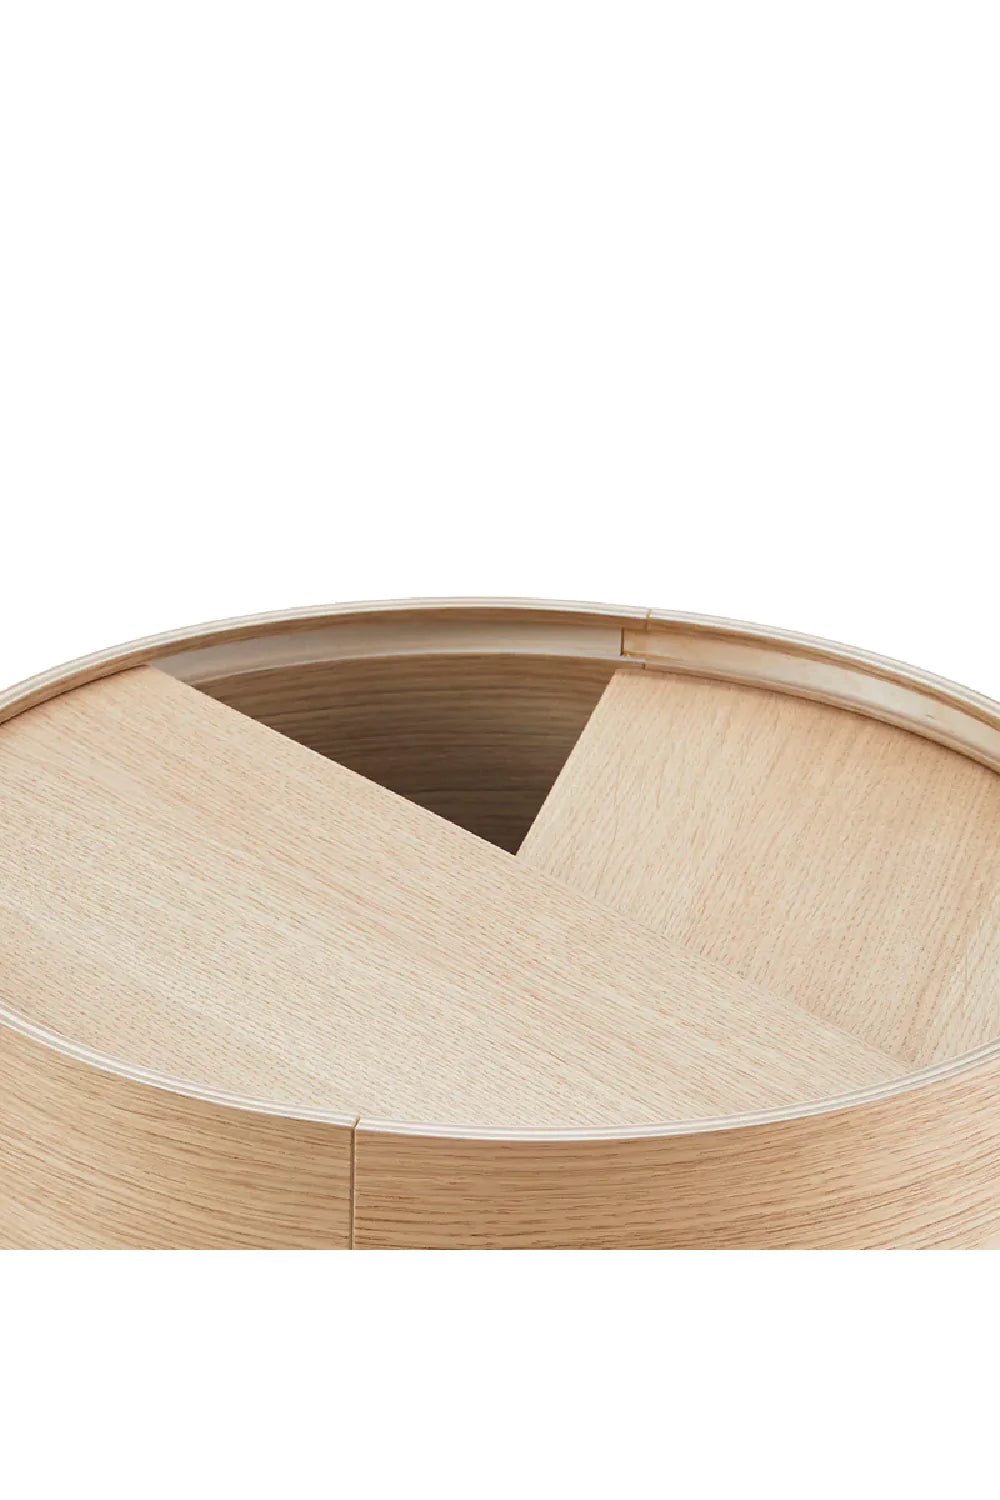 Contemporary Round Side Table | WOUD Arc | Woodfurniture.com